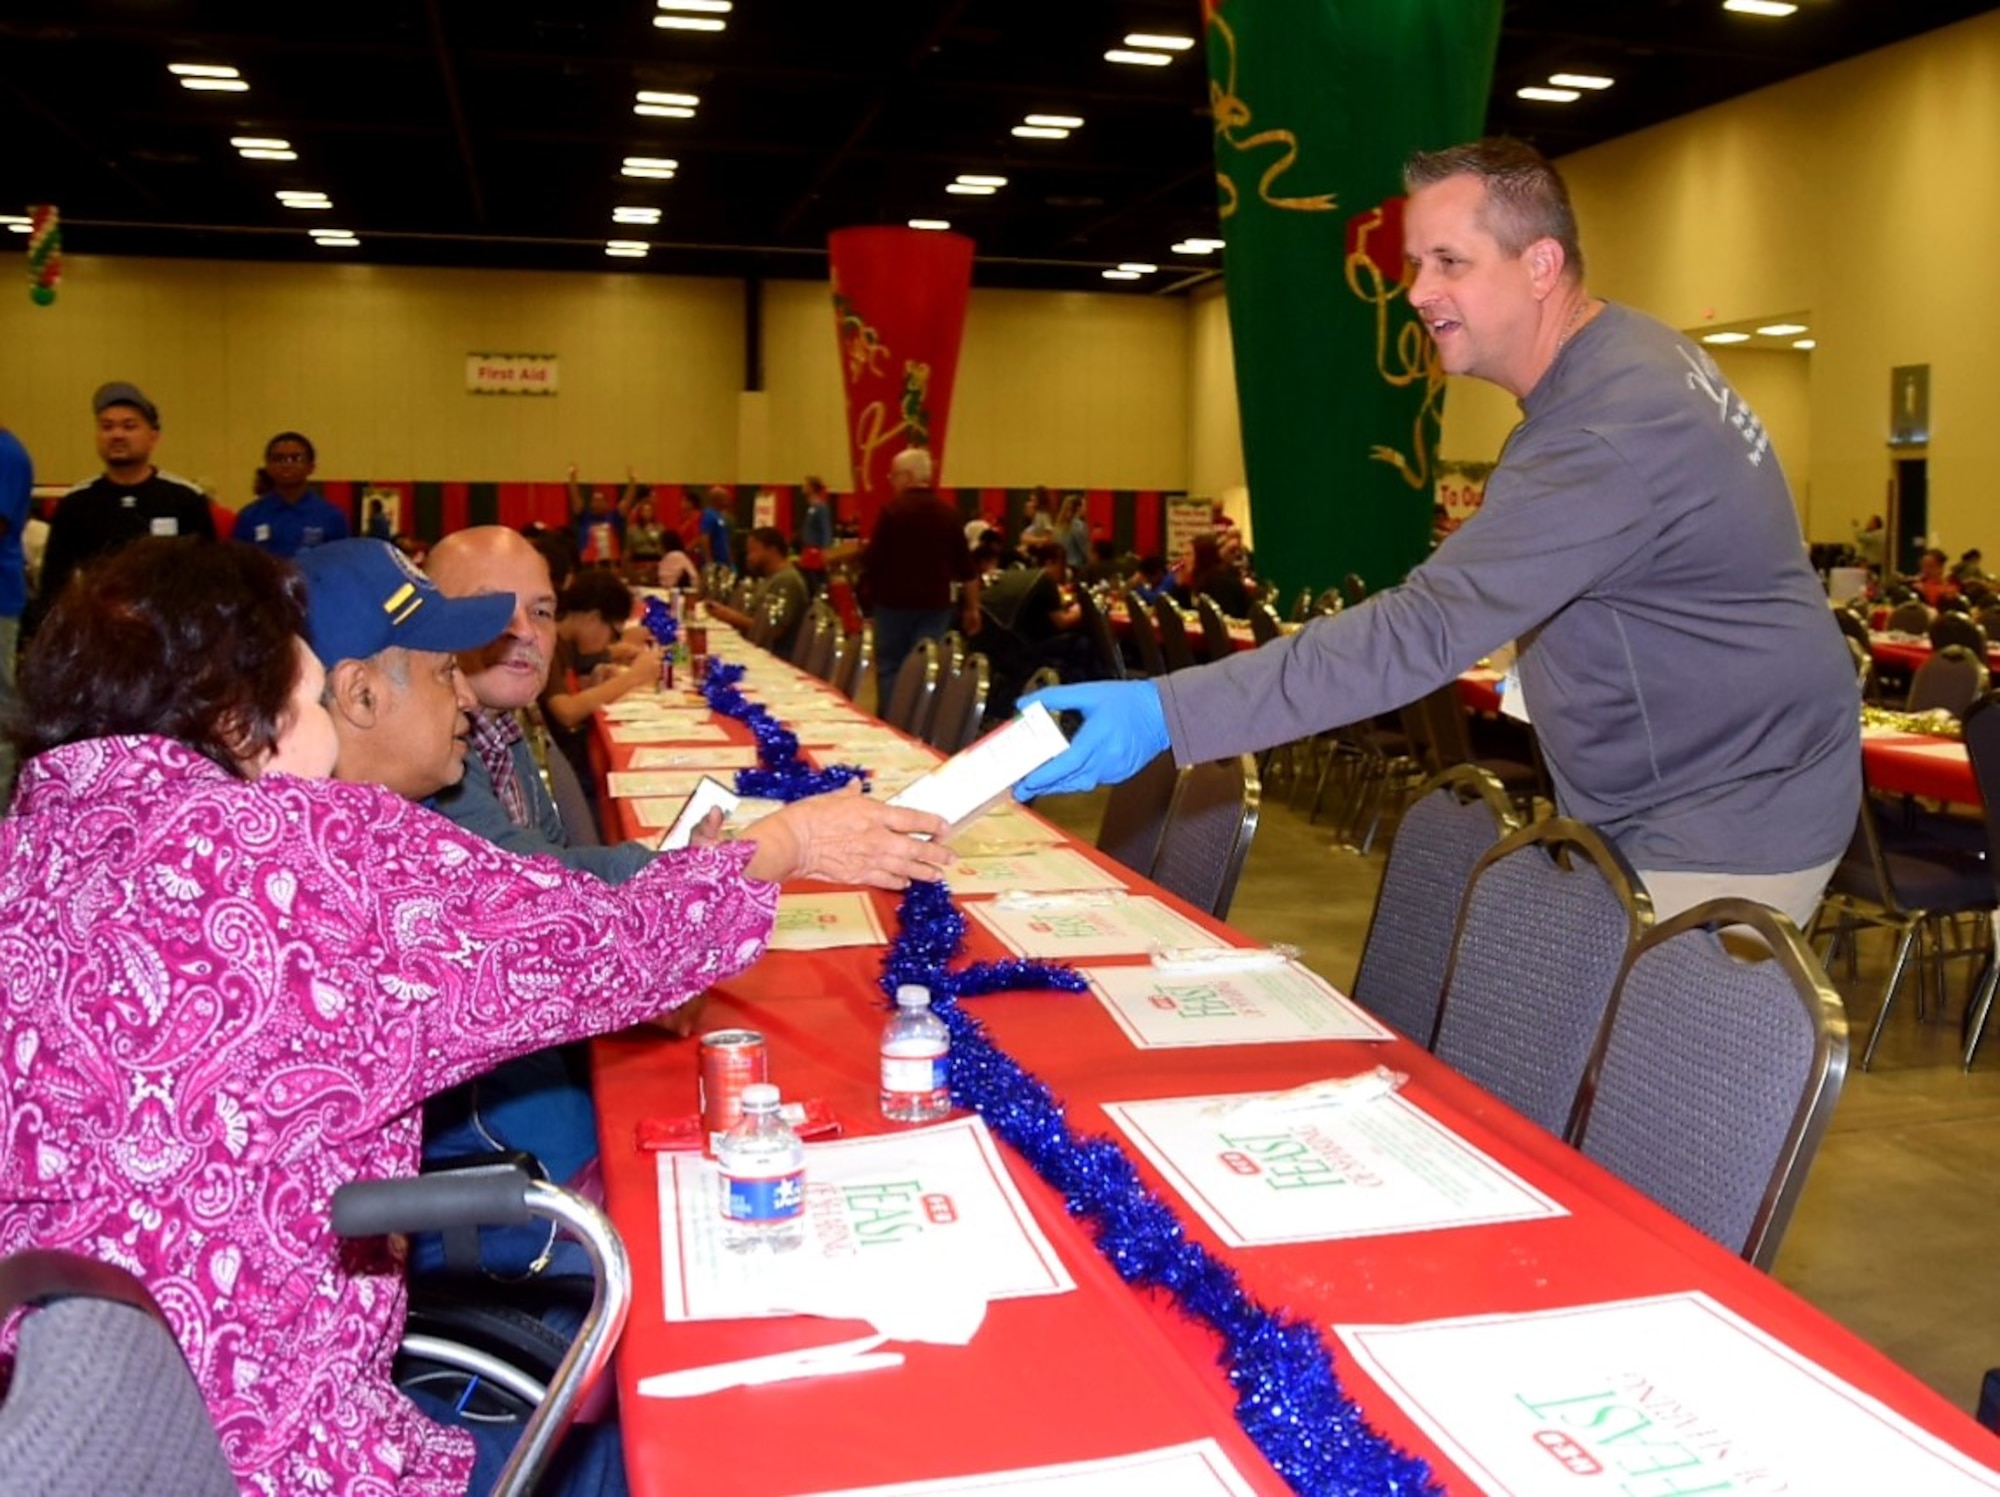 Reserve Citizen Airmen from the 433rd Airlift Wing joined forces with 1,000 other volunteers from the Greater San Antonio Area in serving more than 10,000 meals during the afternoon shift at H-E-B’s 26th Annual Feast of Sharing holiday dinner Dec. 23 at the Henry B. Gonzalez Convention Center in San Antonio, Texas.